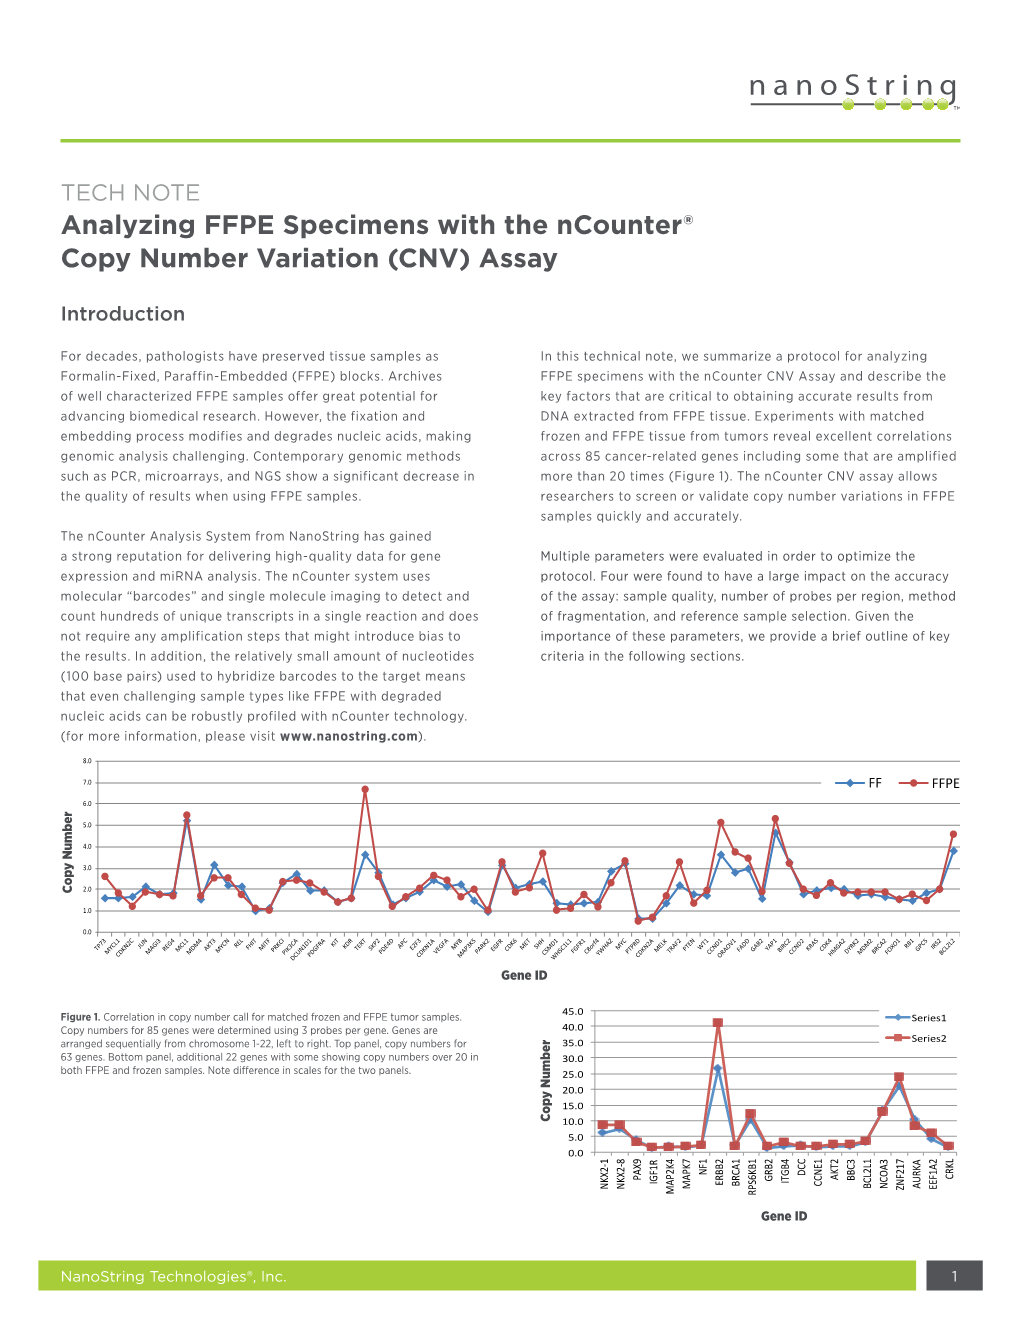 Analyzing FFPE Specimens with the Ncounter CNV Assay